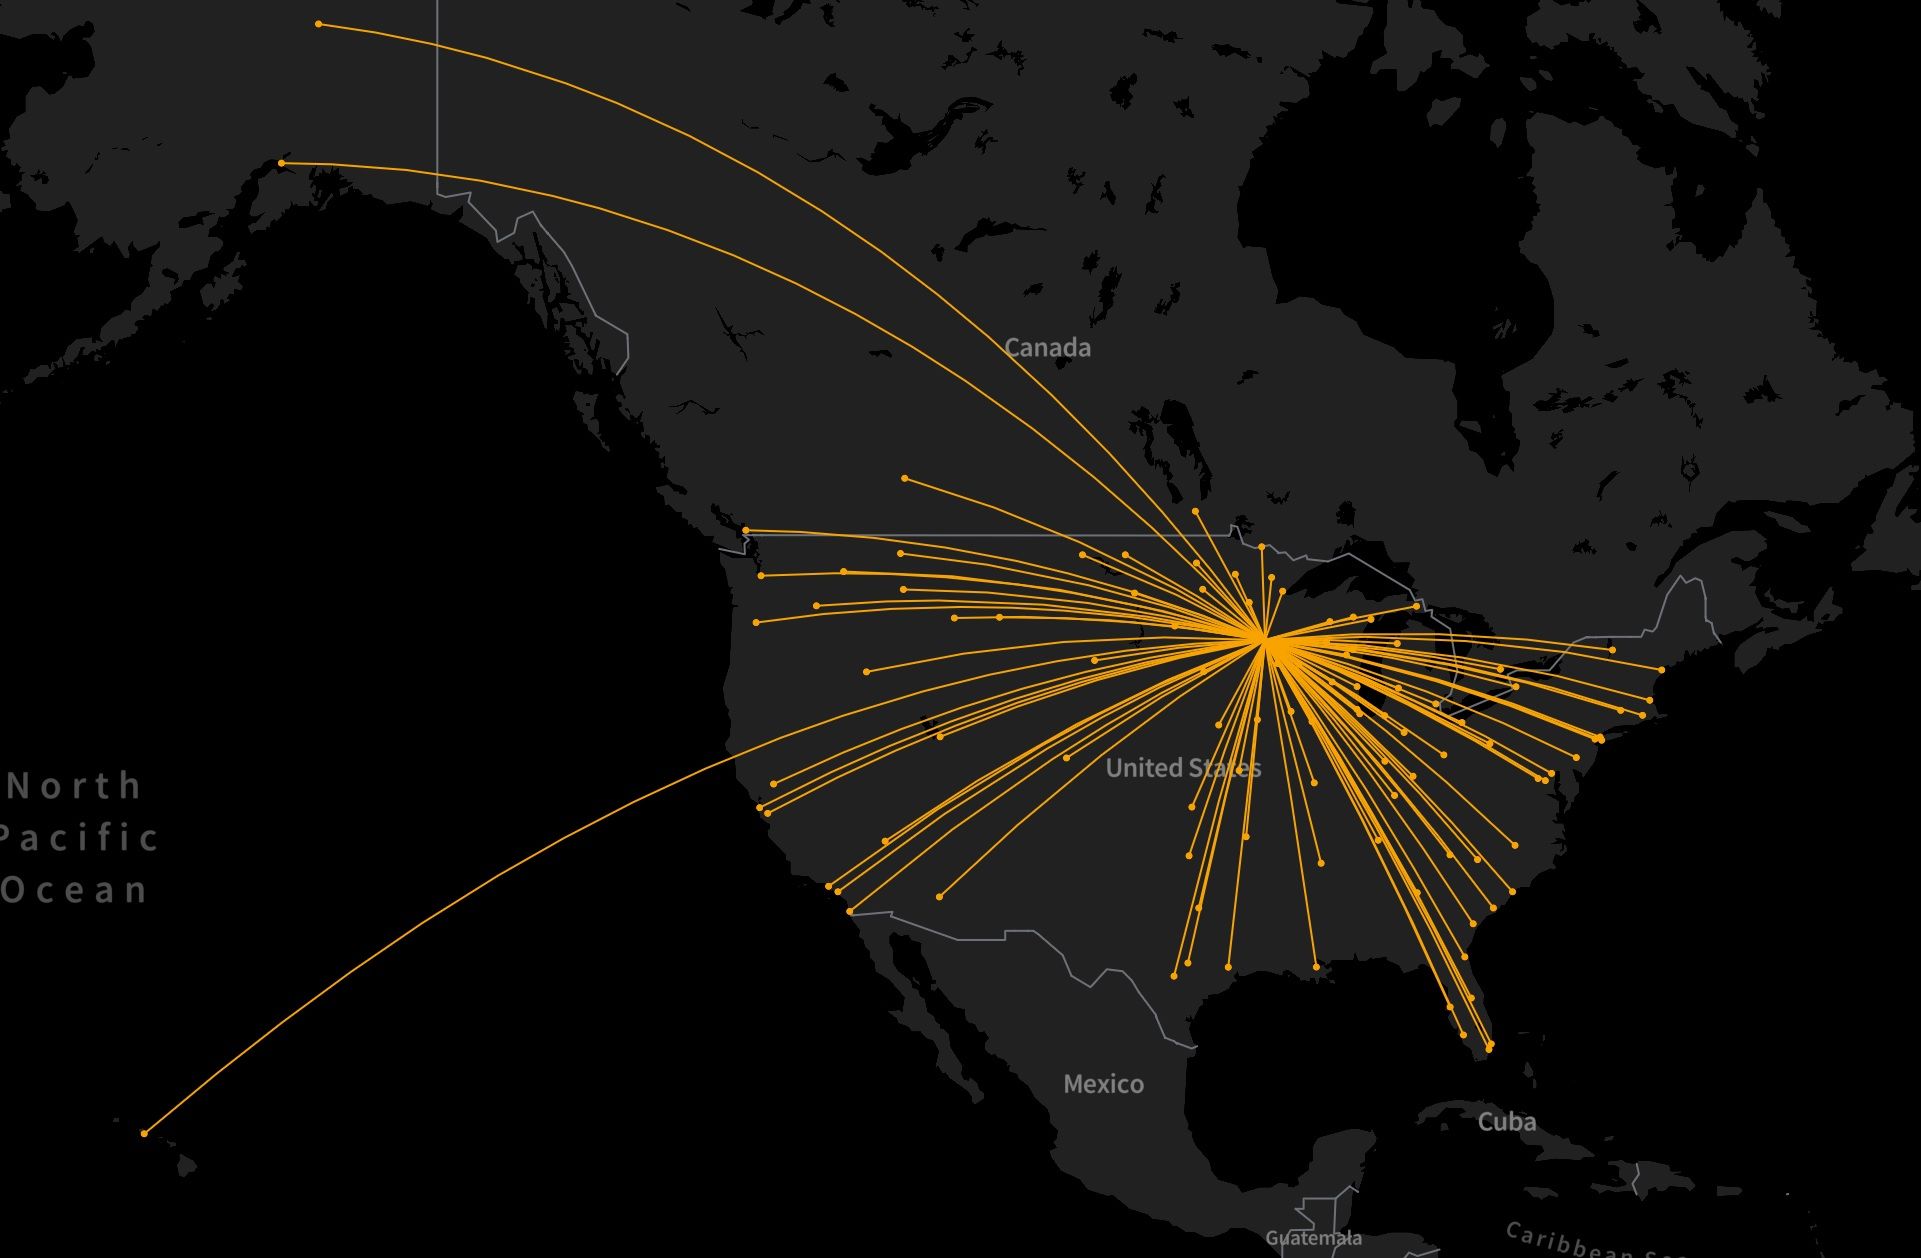 Delta's Minneapolis US and Canada routes